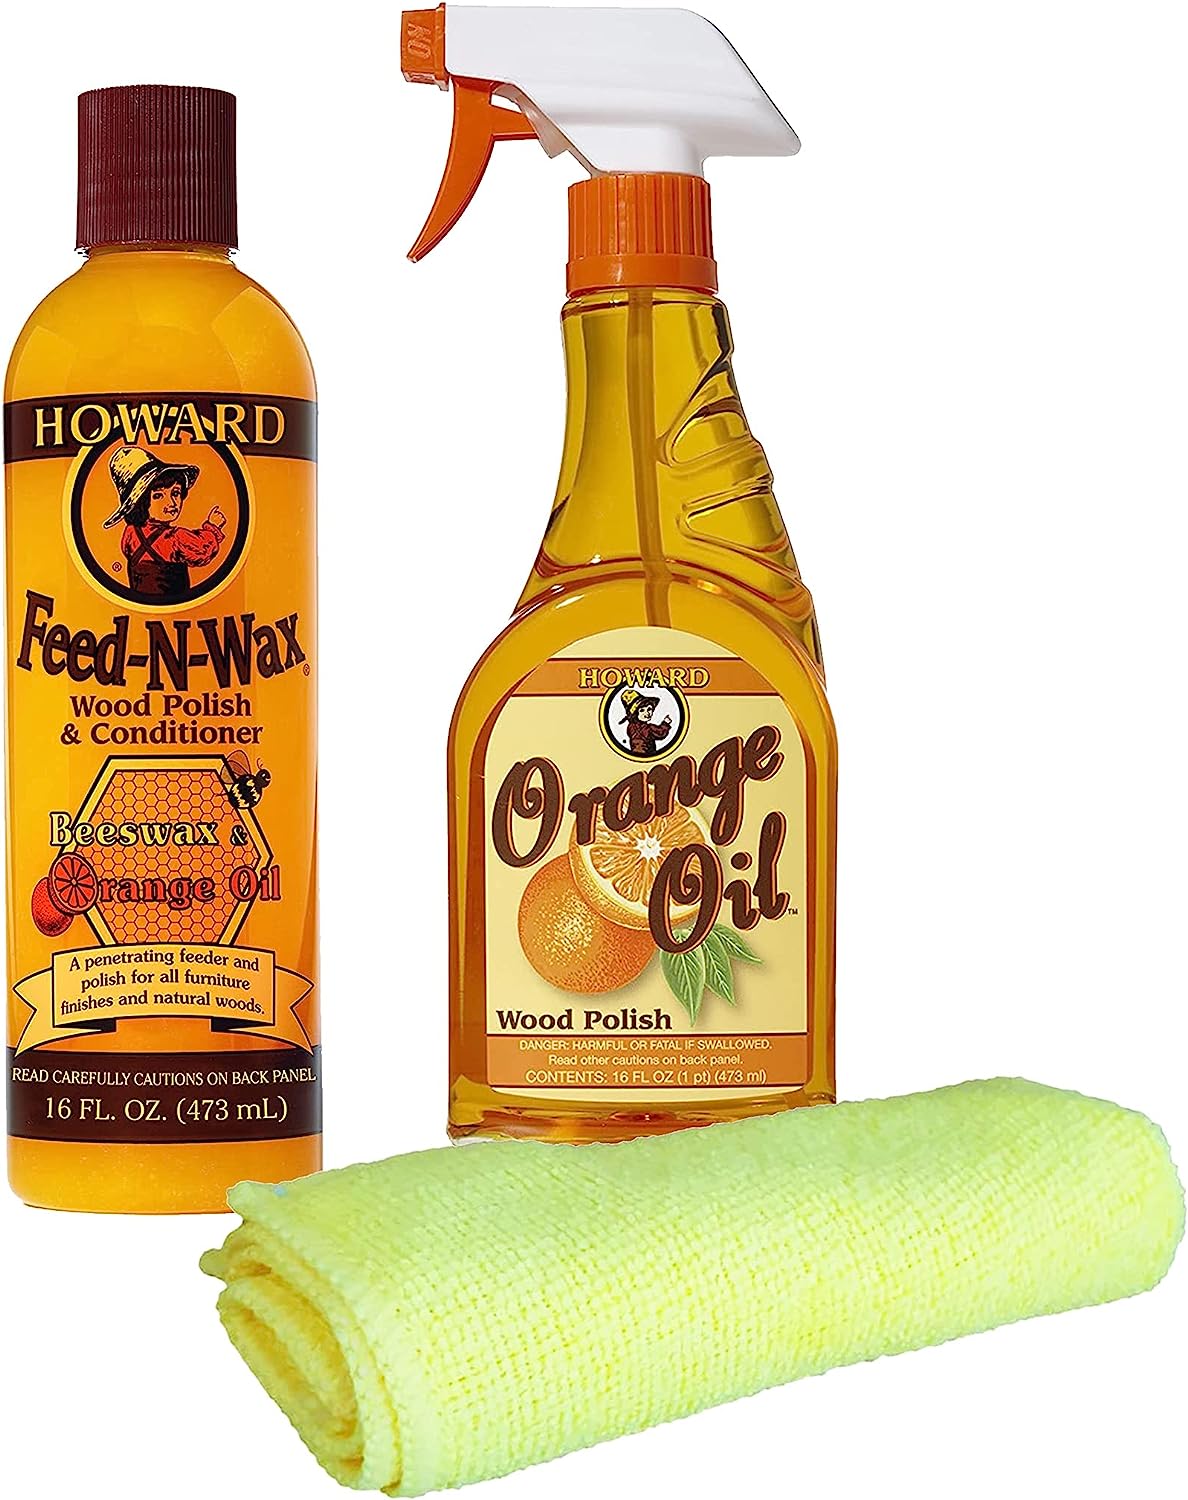 Howard Feed N Wax Wood Polish and Conditioner, and [...]